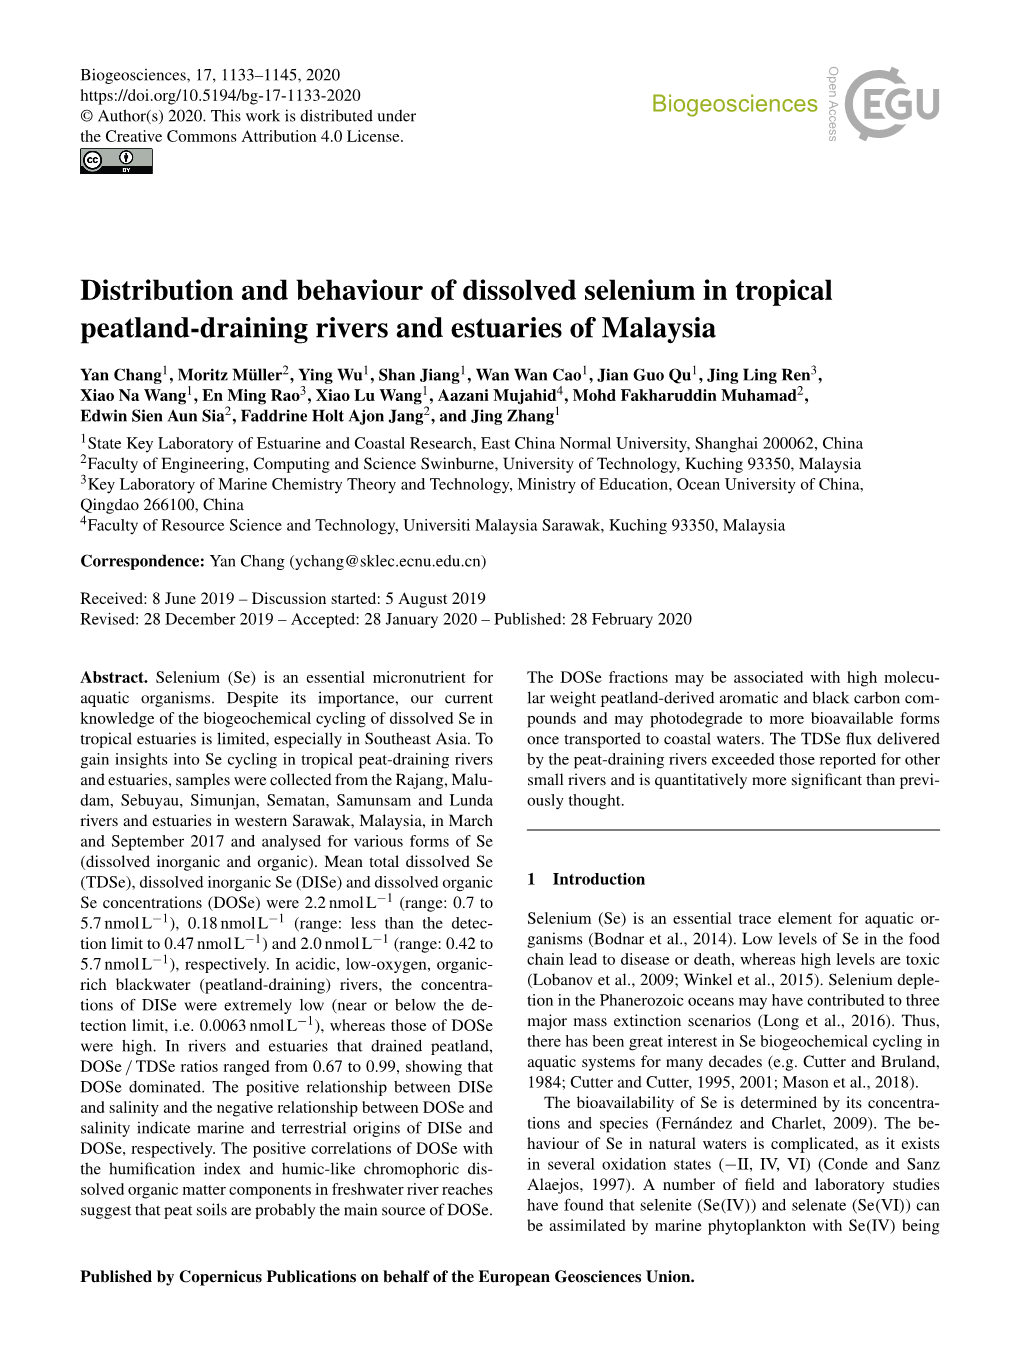 Distribution and Behaviour of Dissolved Selenium in Tropical Peatland-Draining Rivers and Estuaries of Malaysia